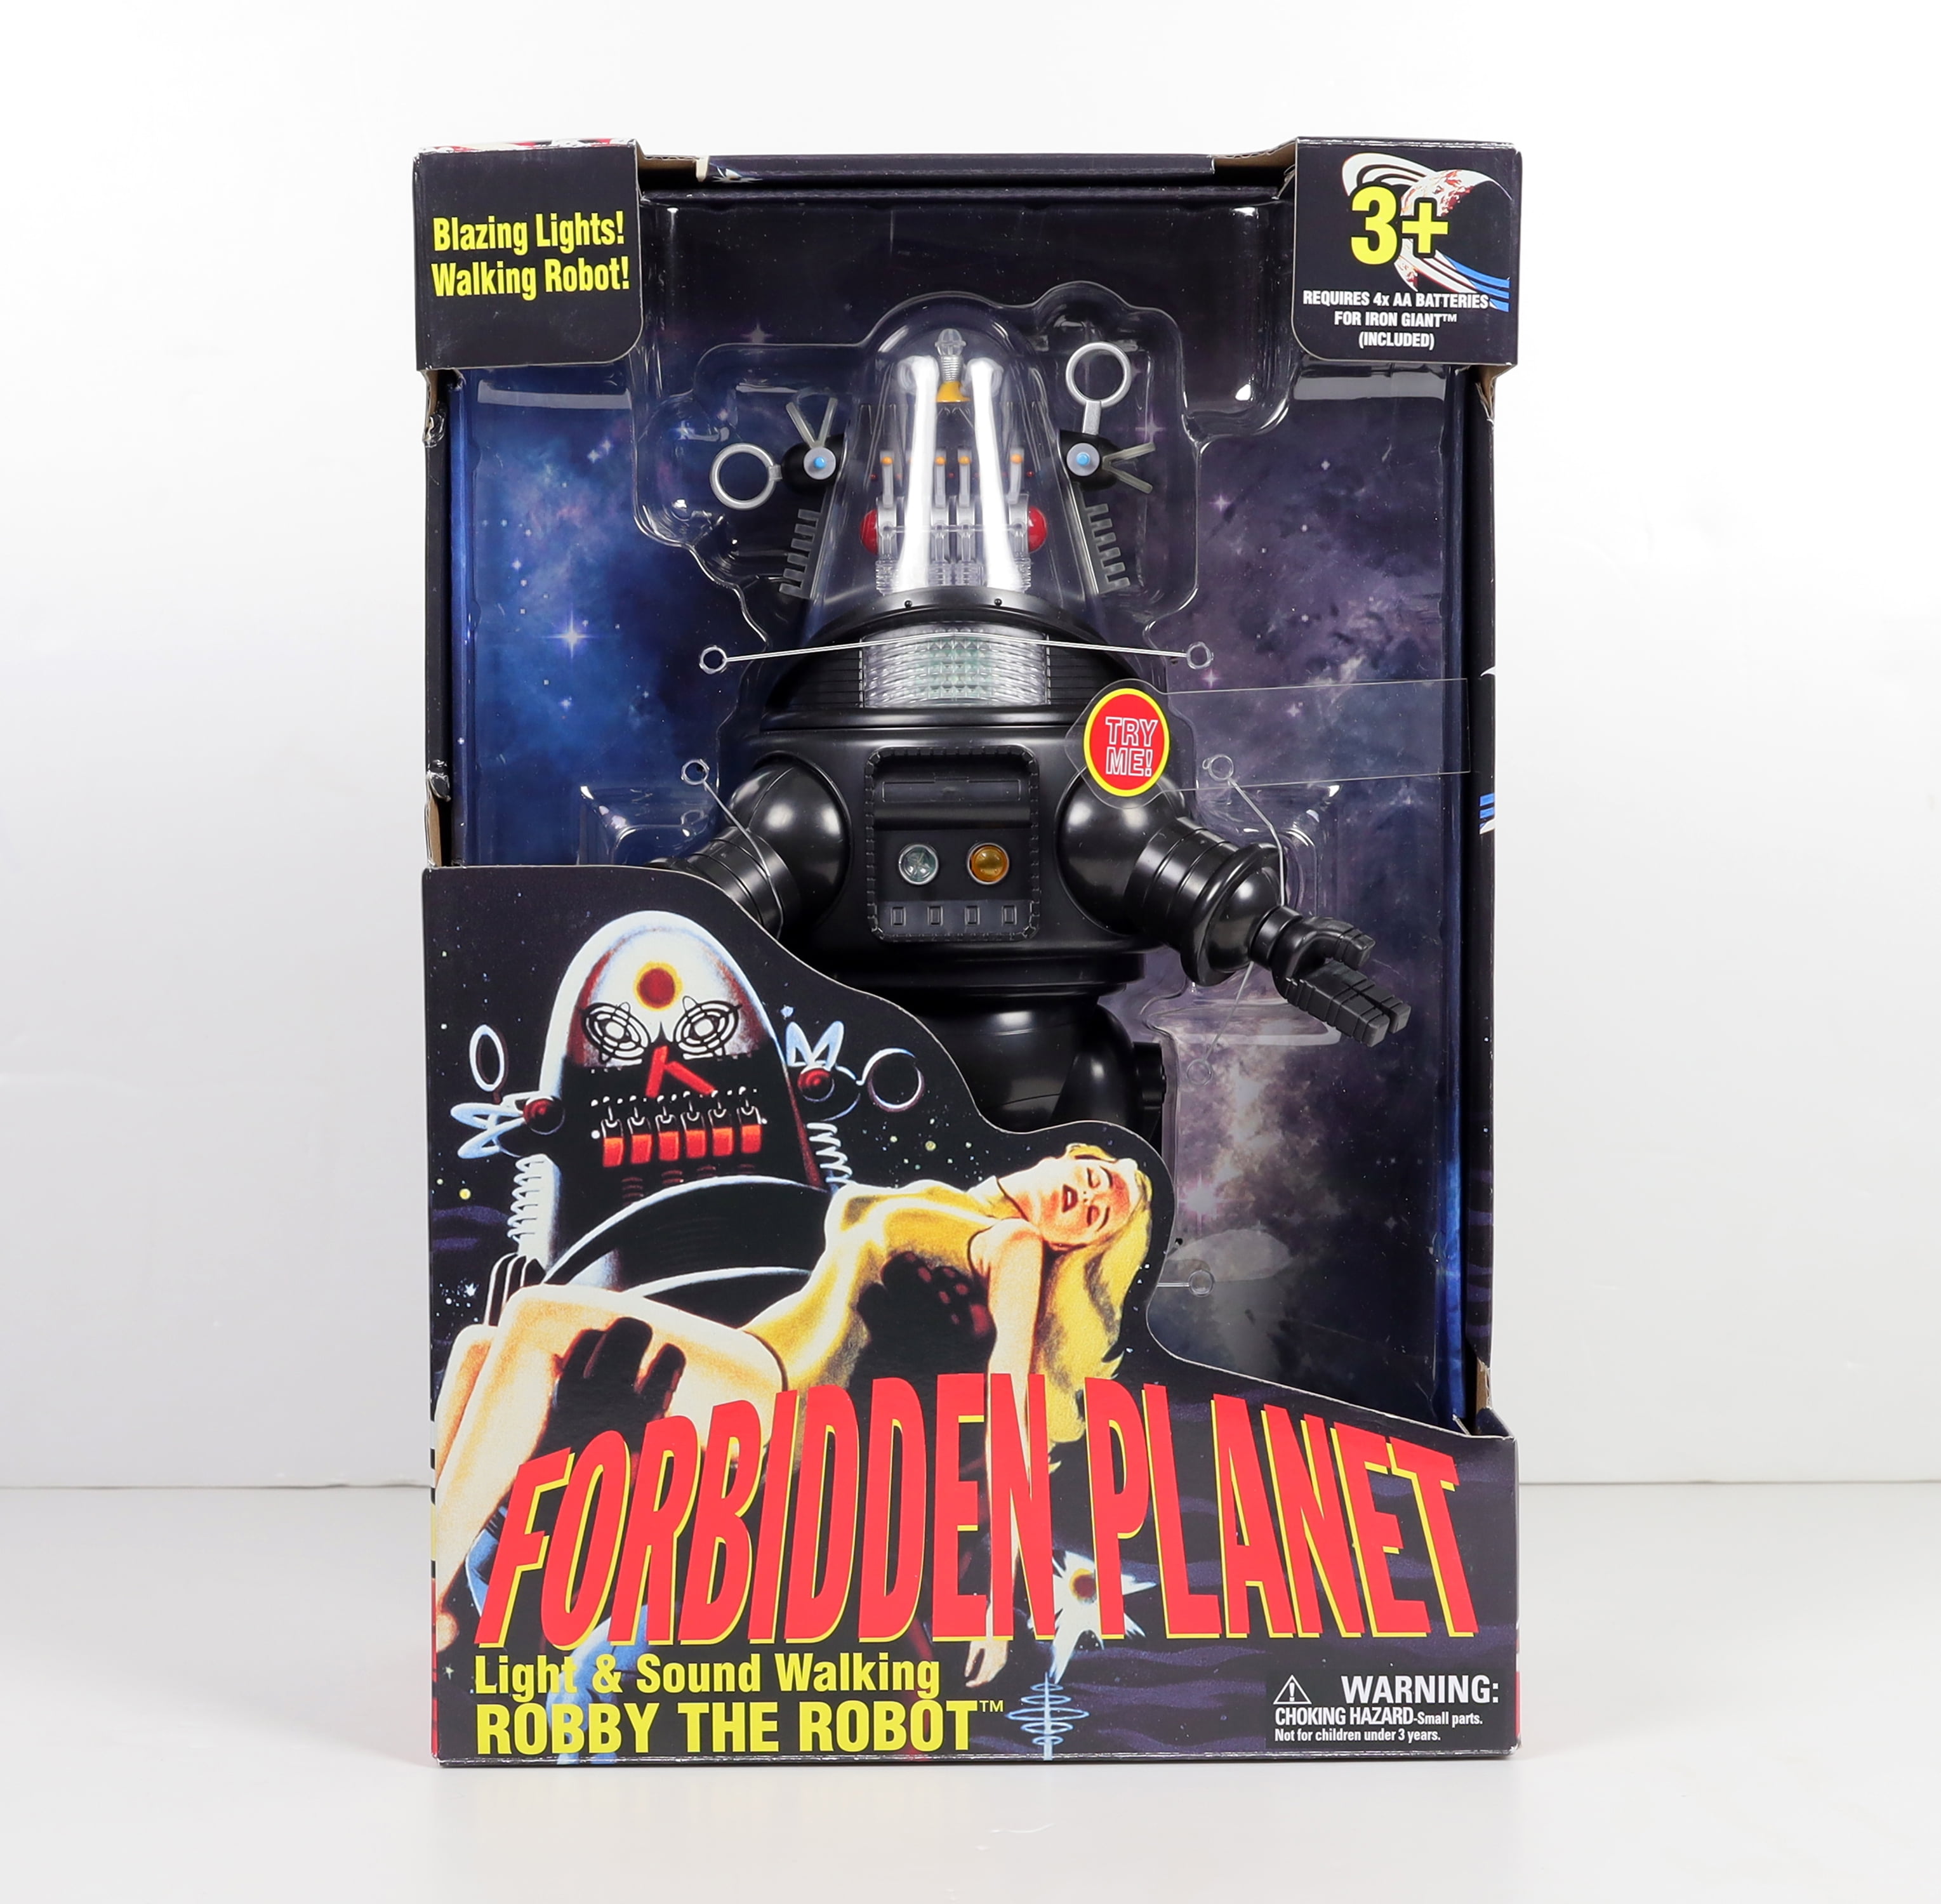 Forbidden Planet Robby the Robot Walking Talking Lights & Sounds SAME-DAY SHIP 